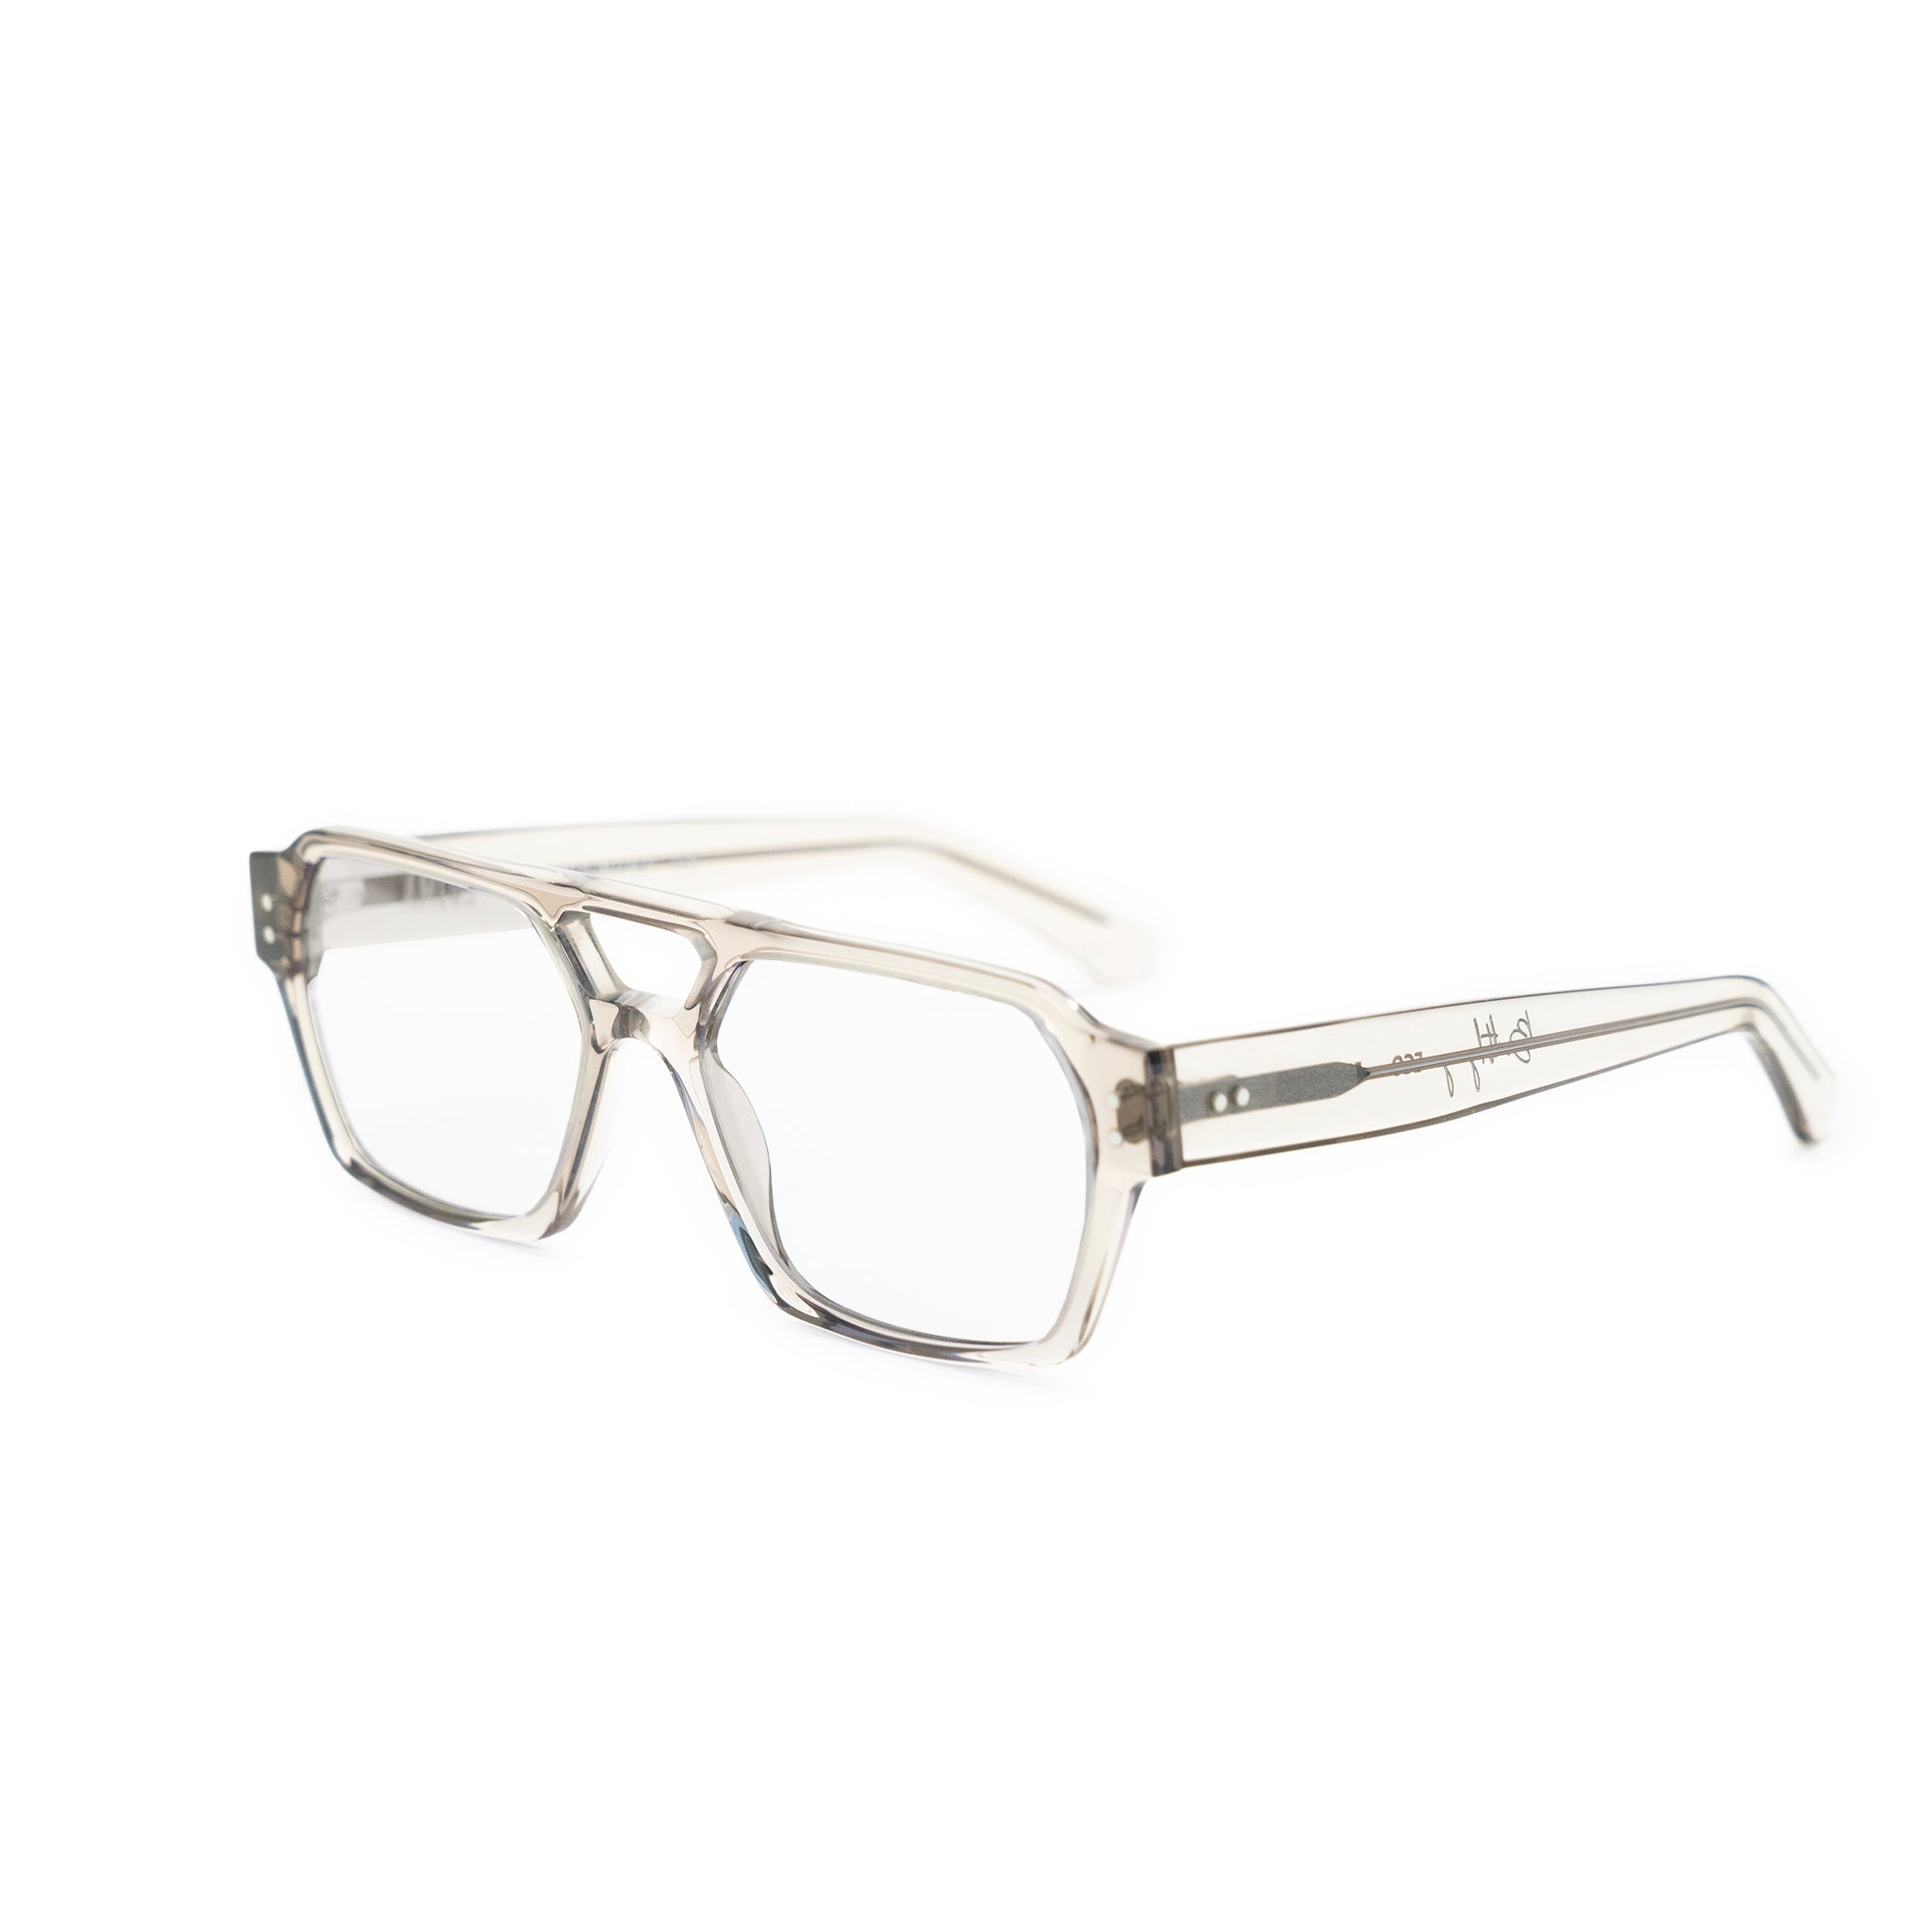 Ego optical glasses in transparent grey from Ameos Eyewear.